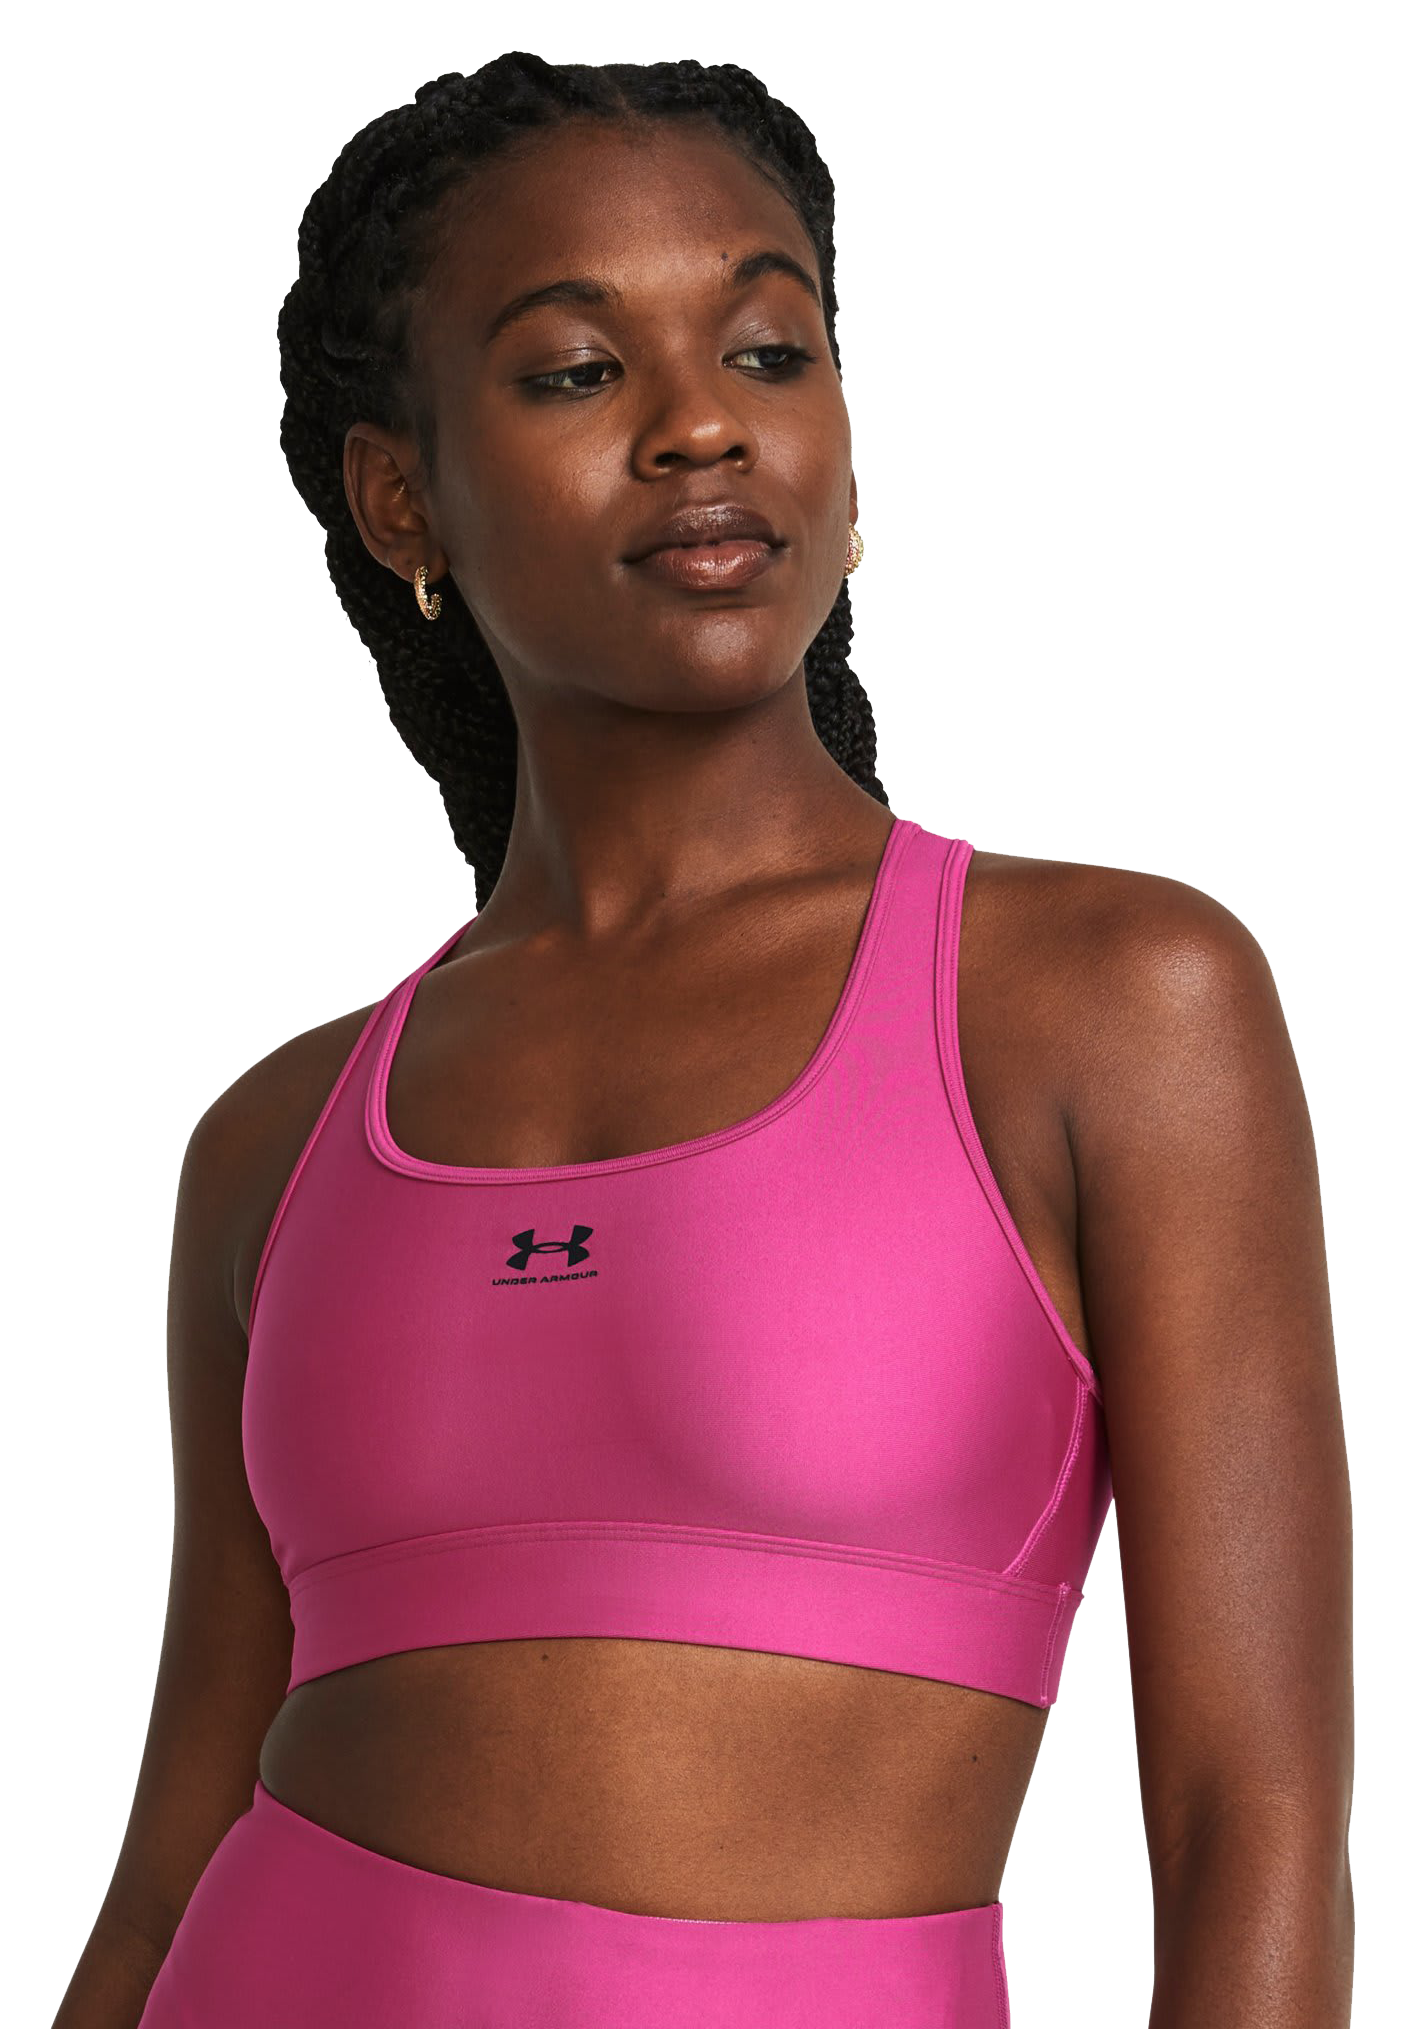 Under Armour Authentics mid support padless sports bra in blue and